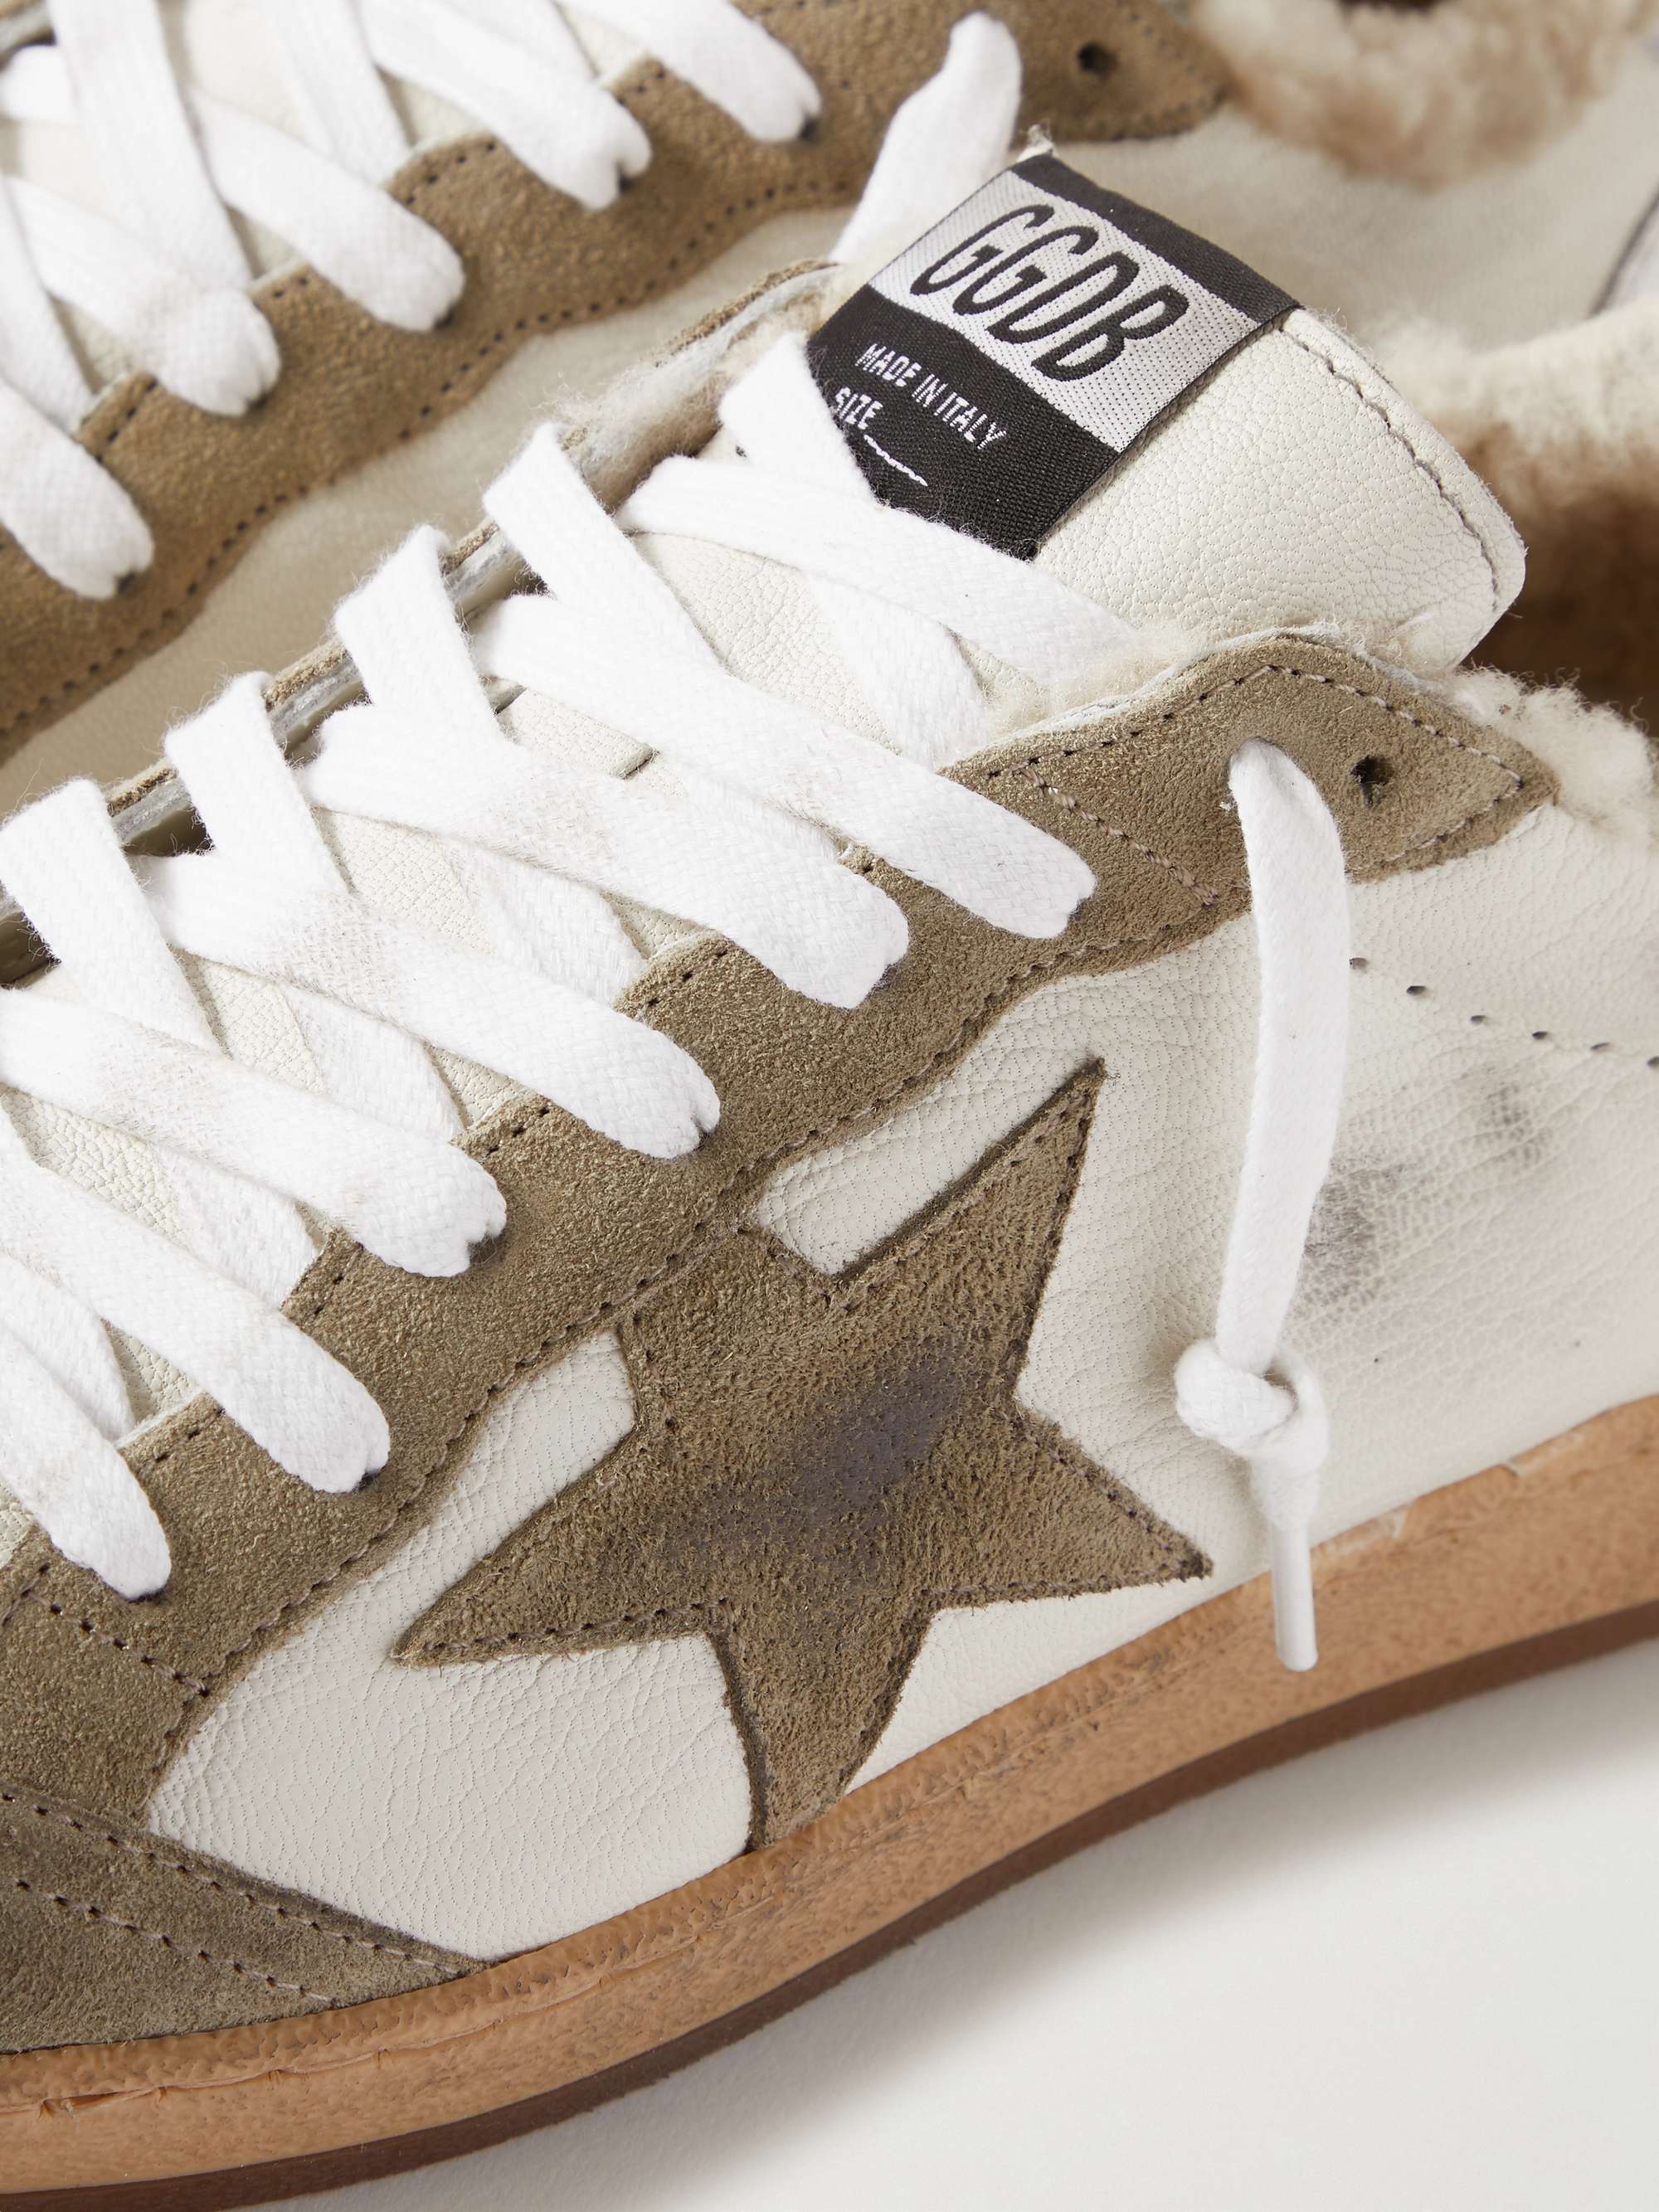 GOLDEN GOOSE Ball Star Shearling-Lined Distressed Leather and Suede ...